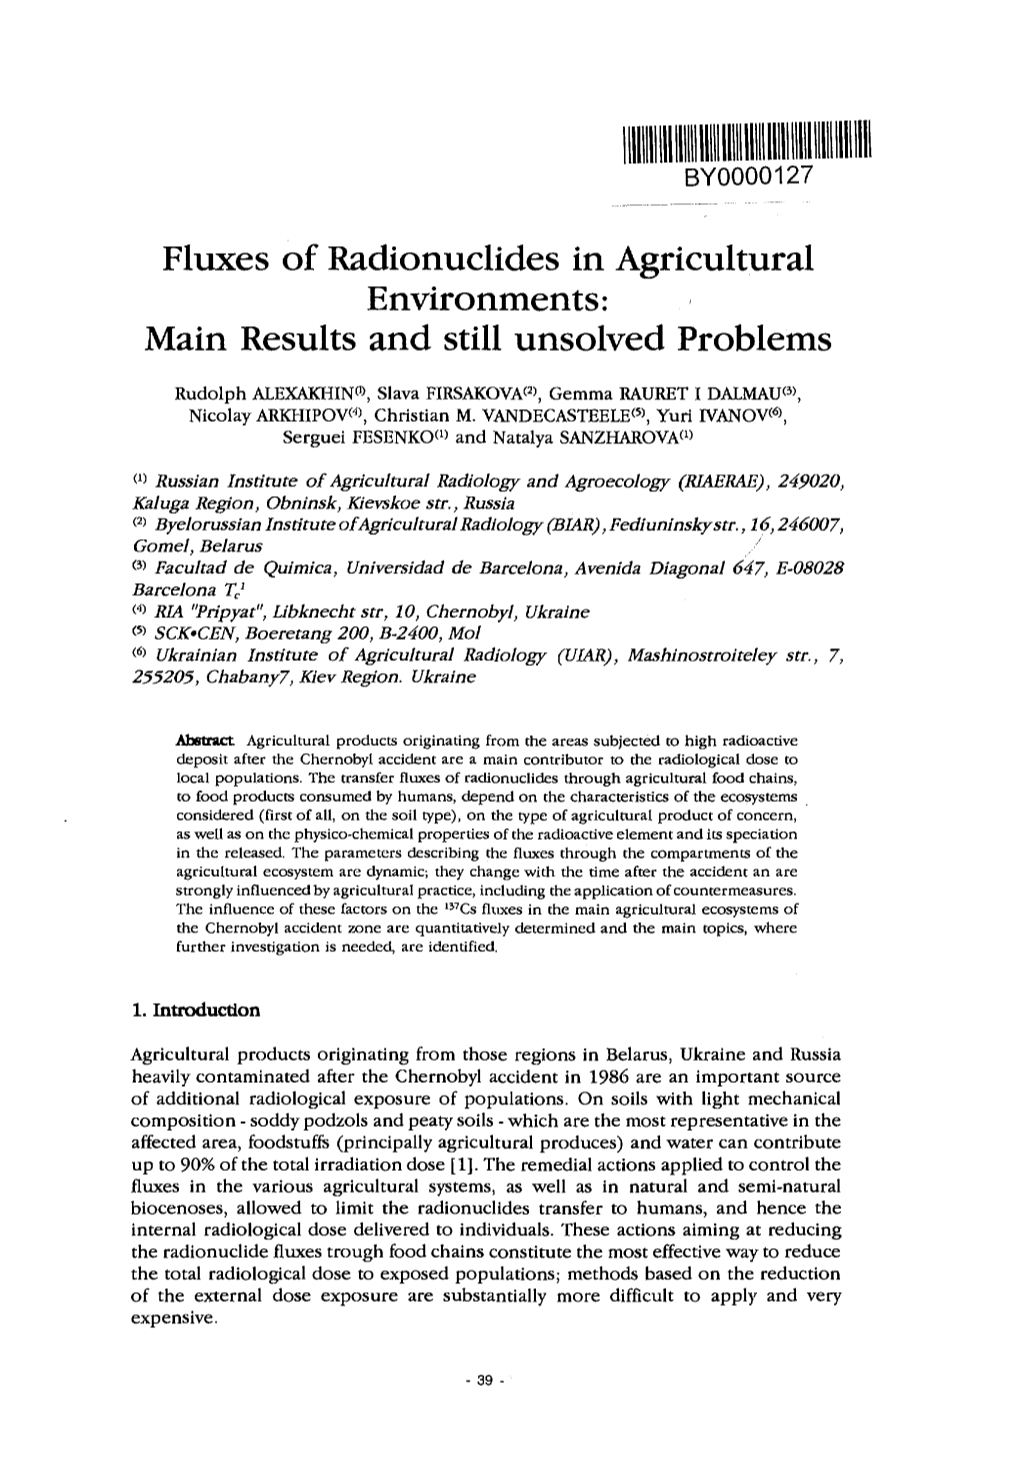 Fluxes of Radionuclides in Agricultural Environments: Main Results and Still Unsolved Problems